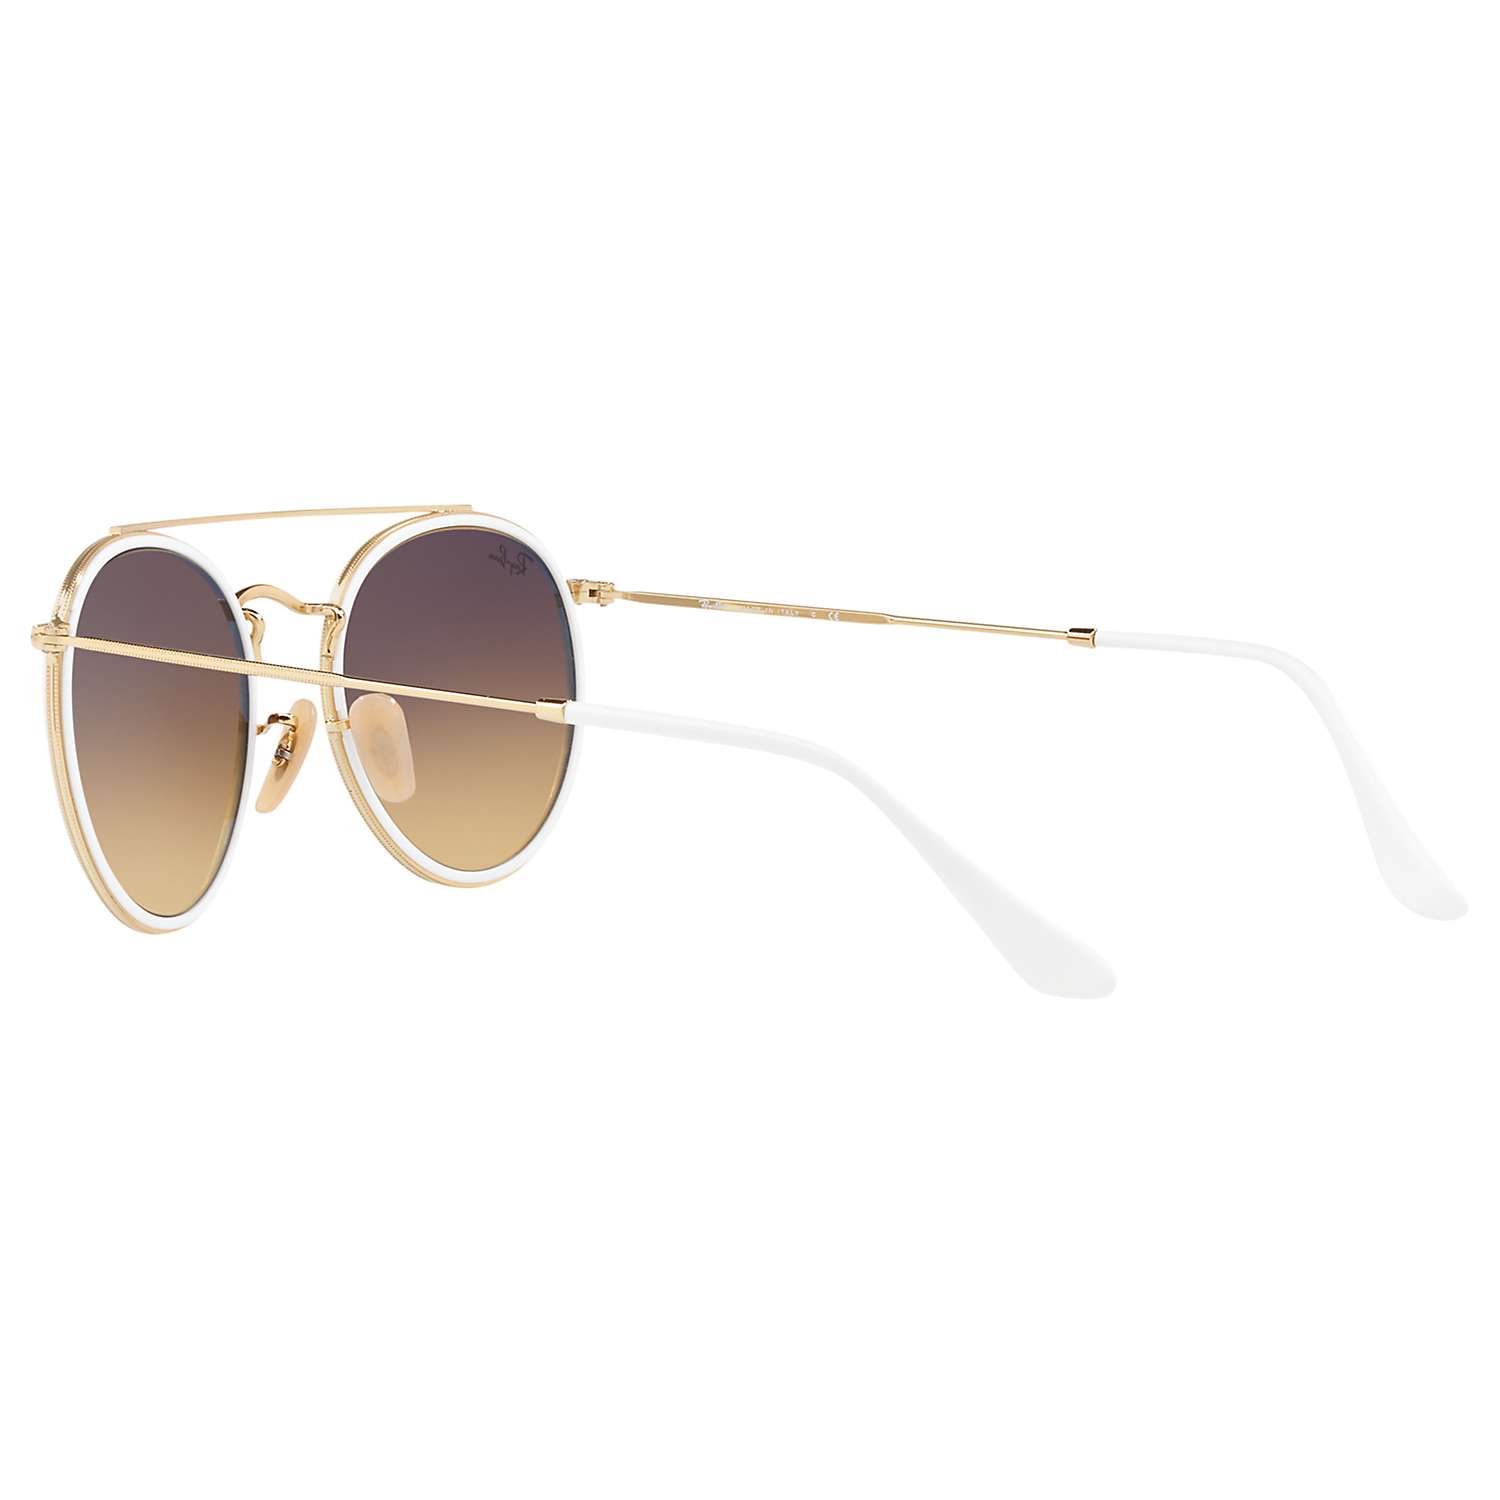 Buy Ray-Ban RB3647N Unisex Double Bridge Oval Sunglasses Online at johnlewis.com